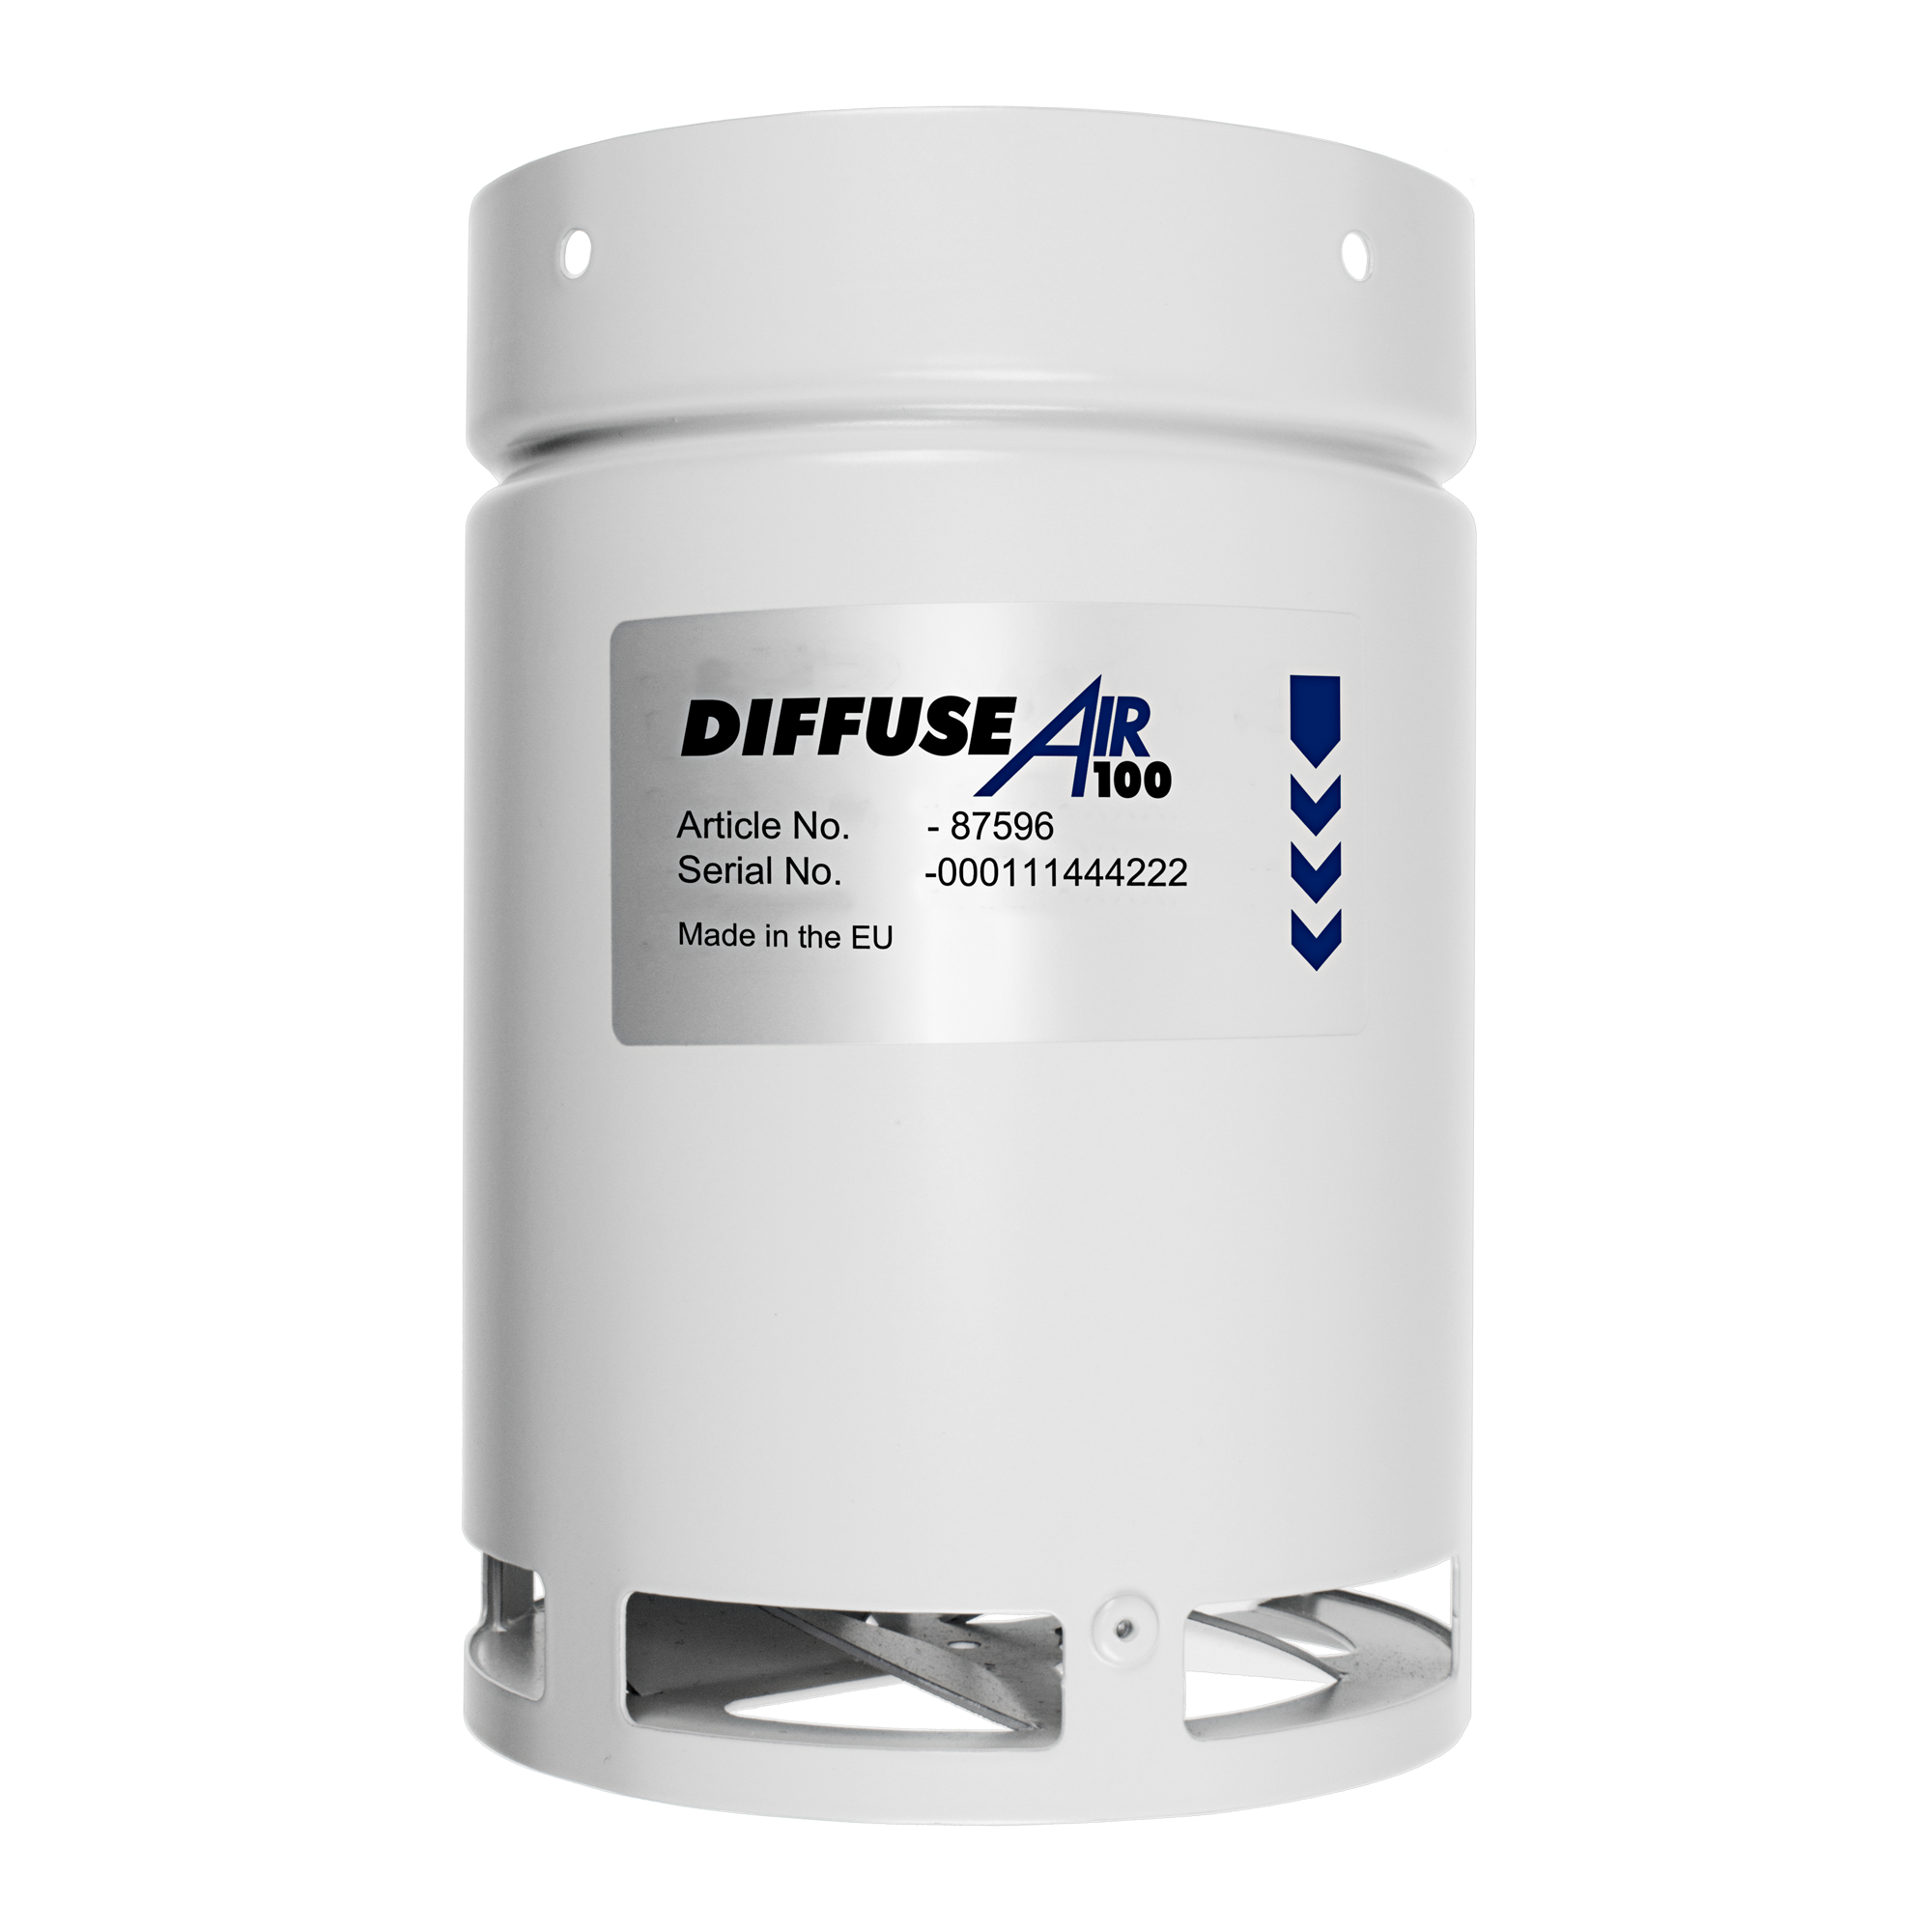 Diffuse Air Systems